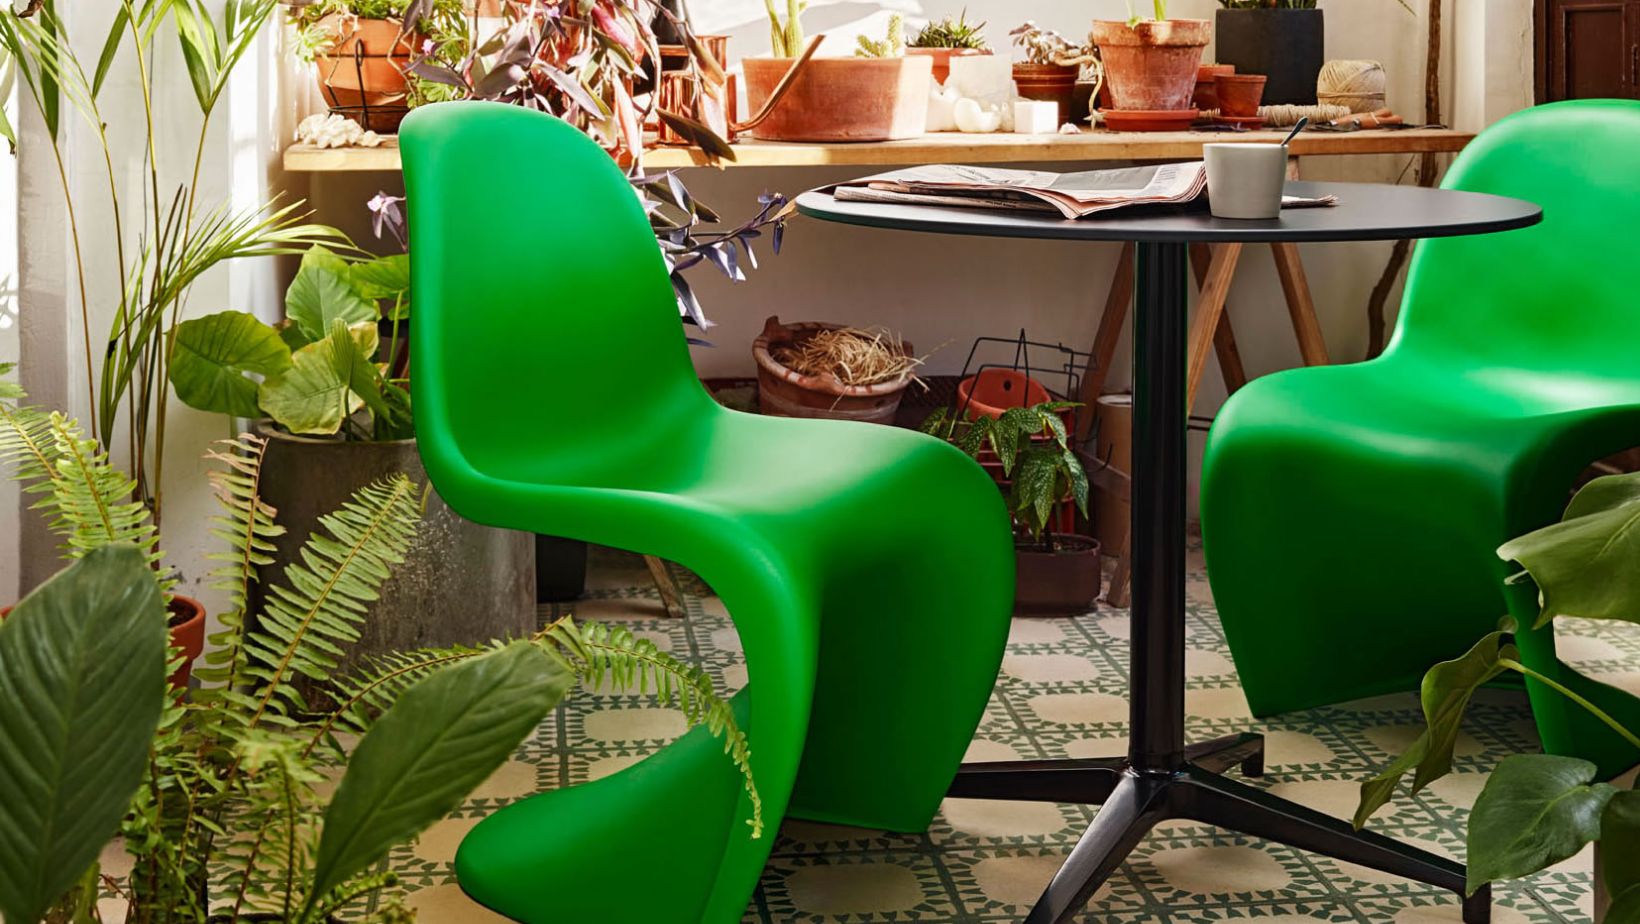 Why Pantone Chairs are a Great Option for Both Indoor and Outdoor Use?